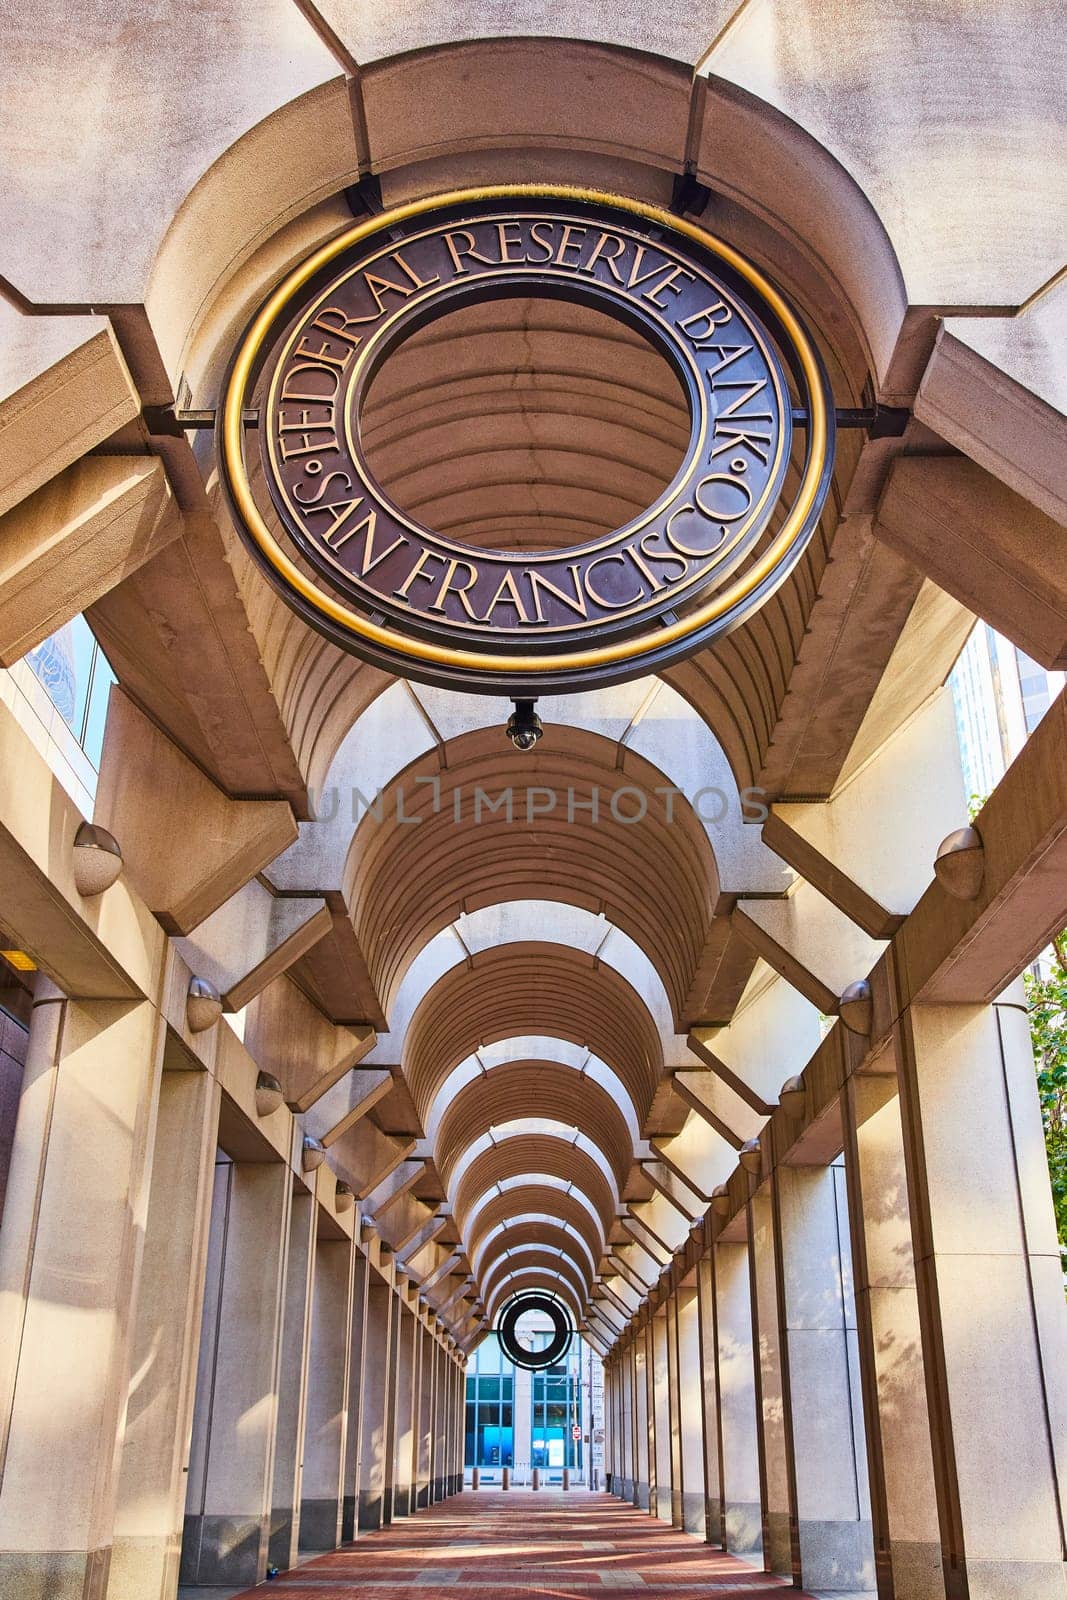 Image of San Francisco Federal Reserve Bank walkway with curved ceiling and red brick ground